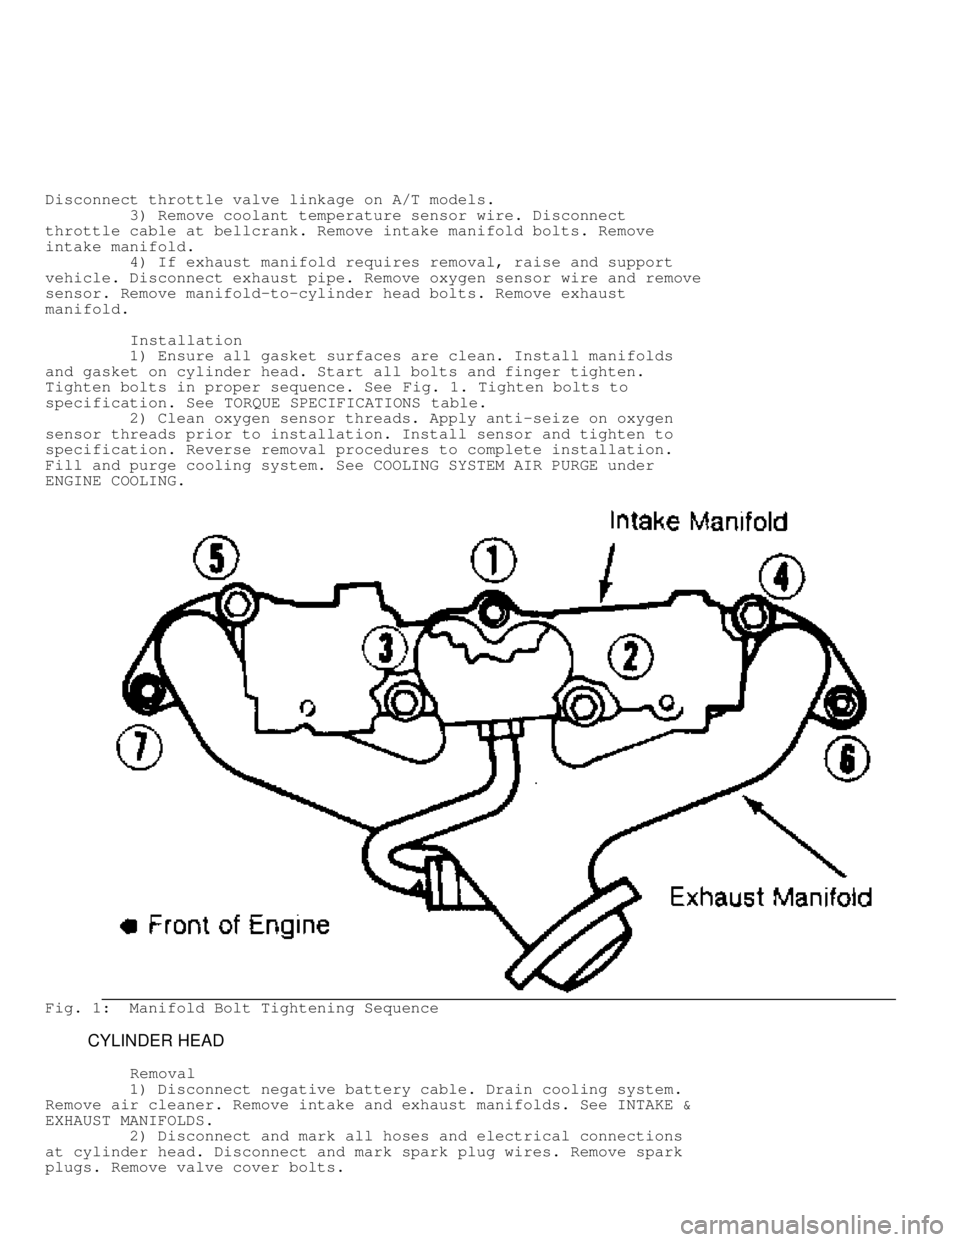 JEEP CHEROKEE 1988  Service Repair Manual Disconnect throttle valve linkage on A/T models.
         3) Remove coolant temperature sensor wire. Disconnect
throttle cable at bellcrank. Remove intake manifold bolts. Remove
intake manifold.
     